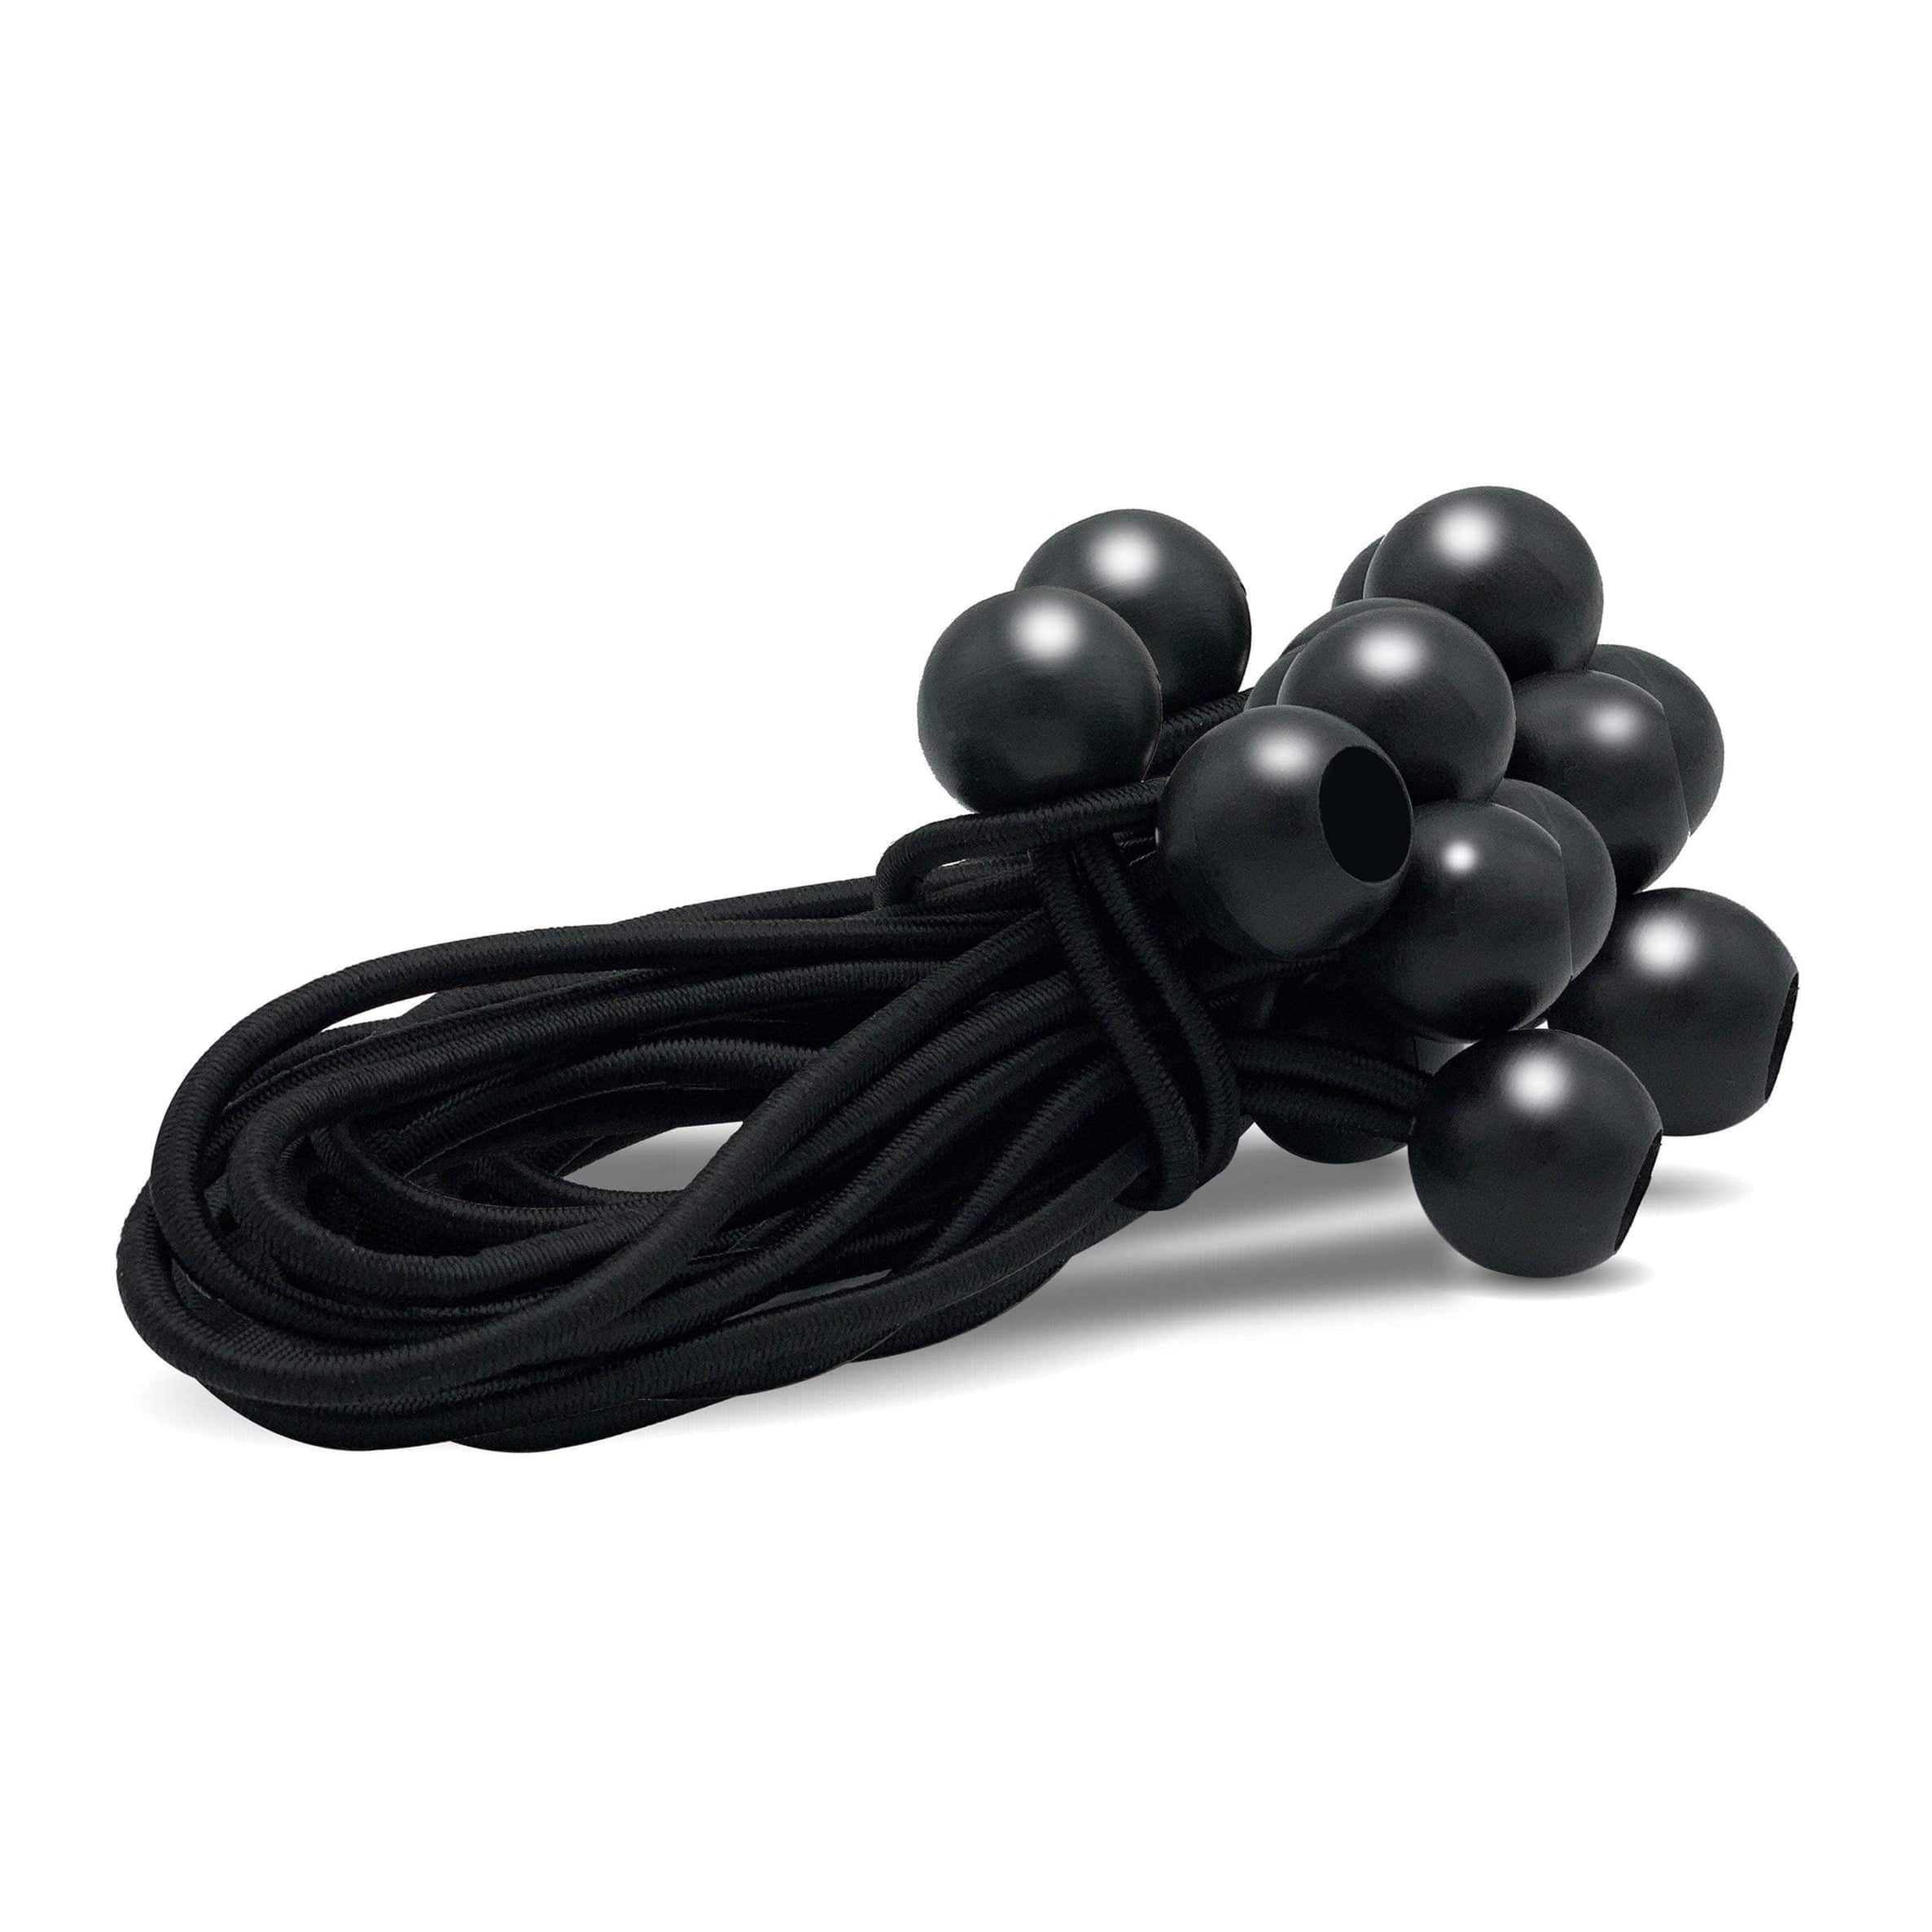 PVC Pipe Ball Ties - Bungee Stretch Cords, 5 in.